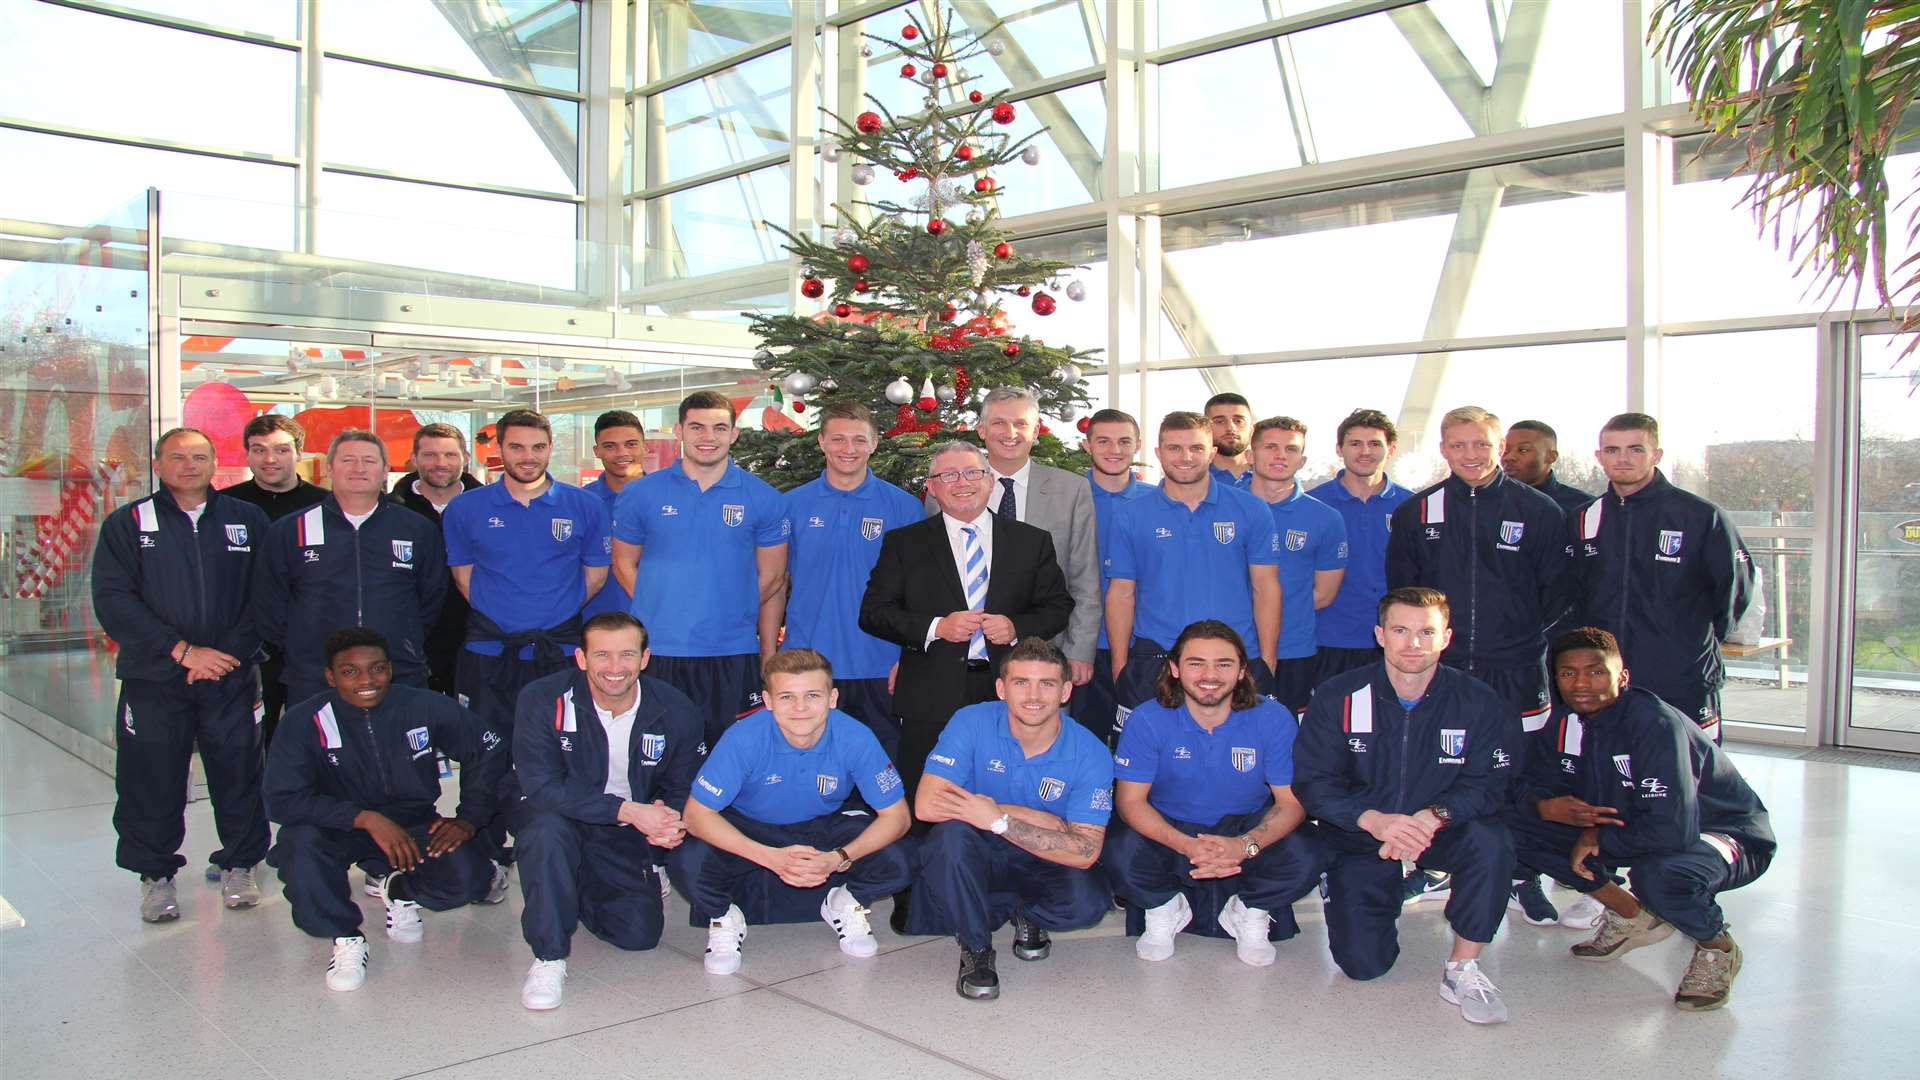 The Gills travelled into London to visit Evelina children's hospital on Monday afternoon